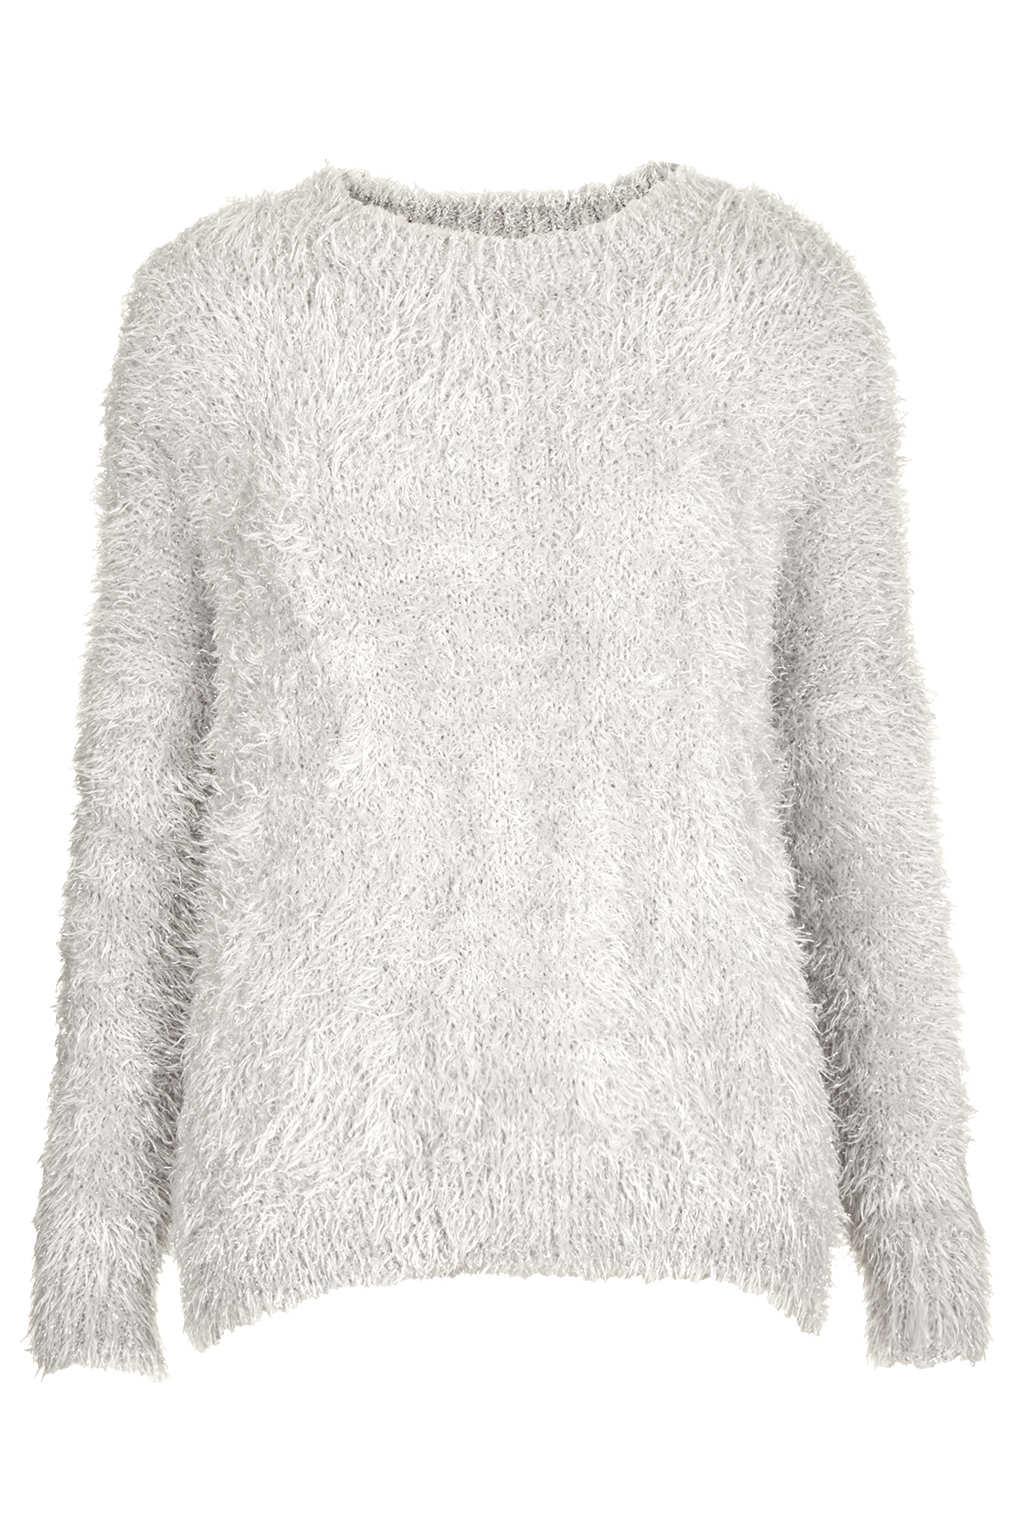 TOPSHOP Knitted Cloud Fluffy Jumper in Silver (White) - Lyst